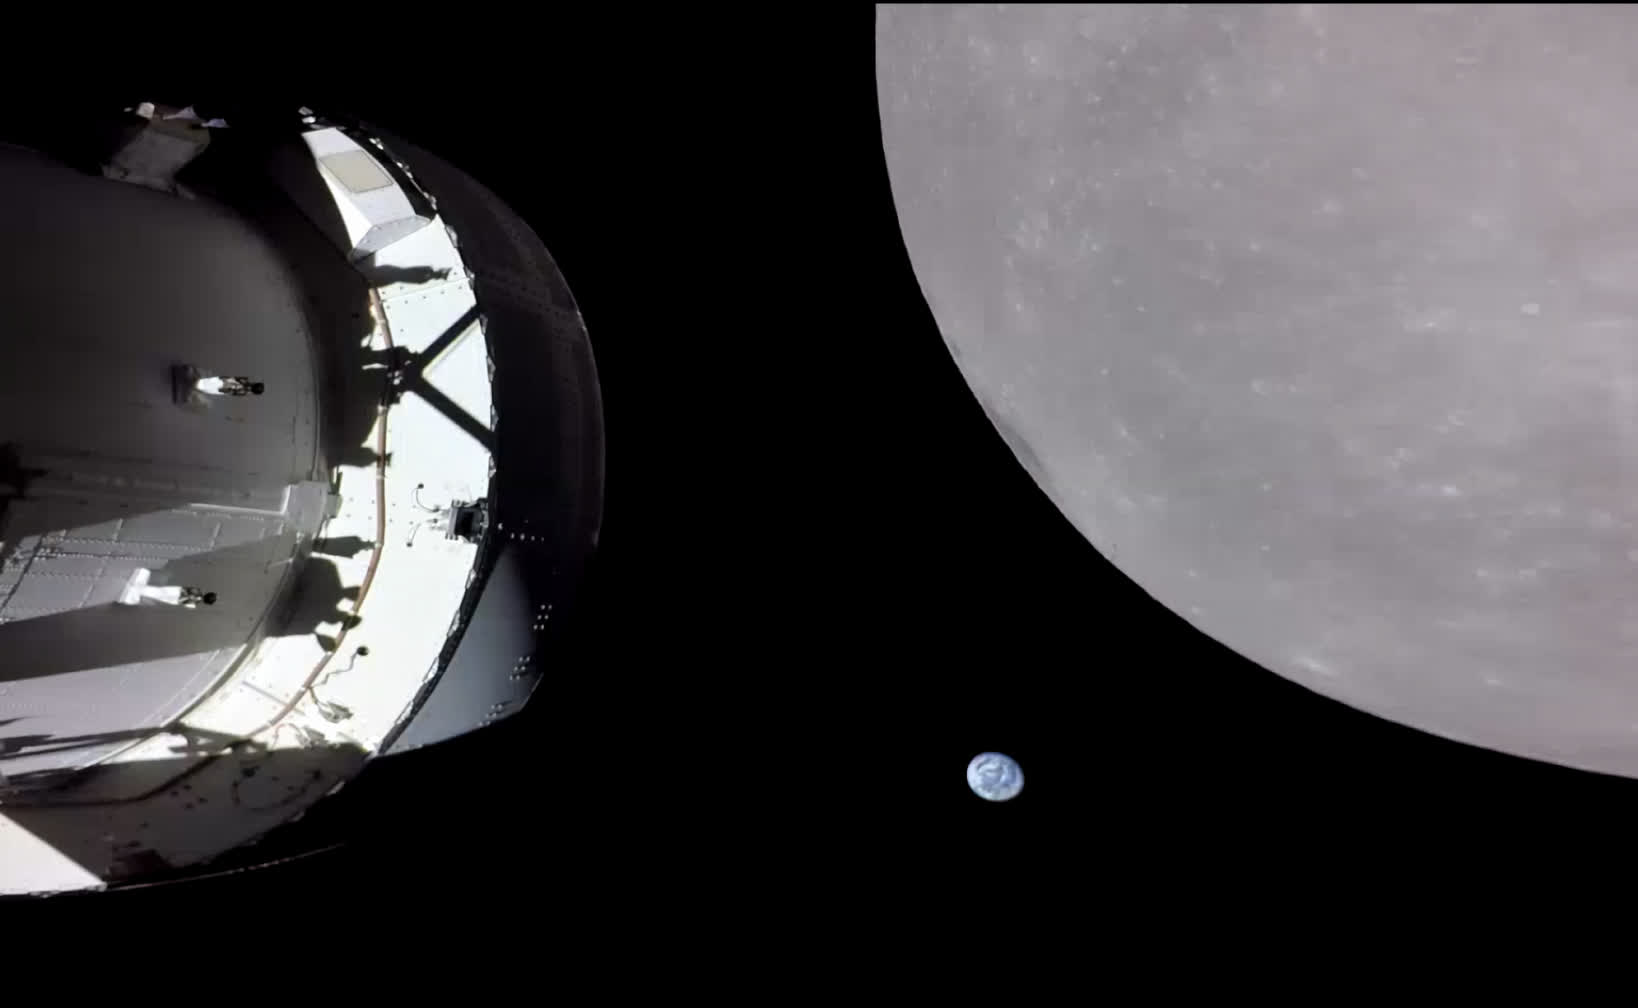 NASA's Orion spacecraft comes within 81 miles of the Moon during successful flyby